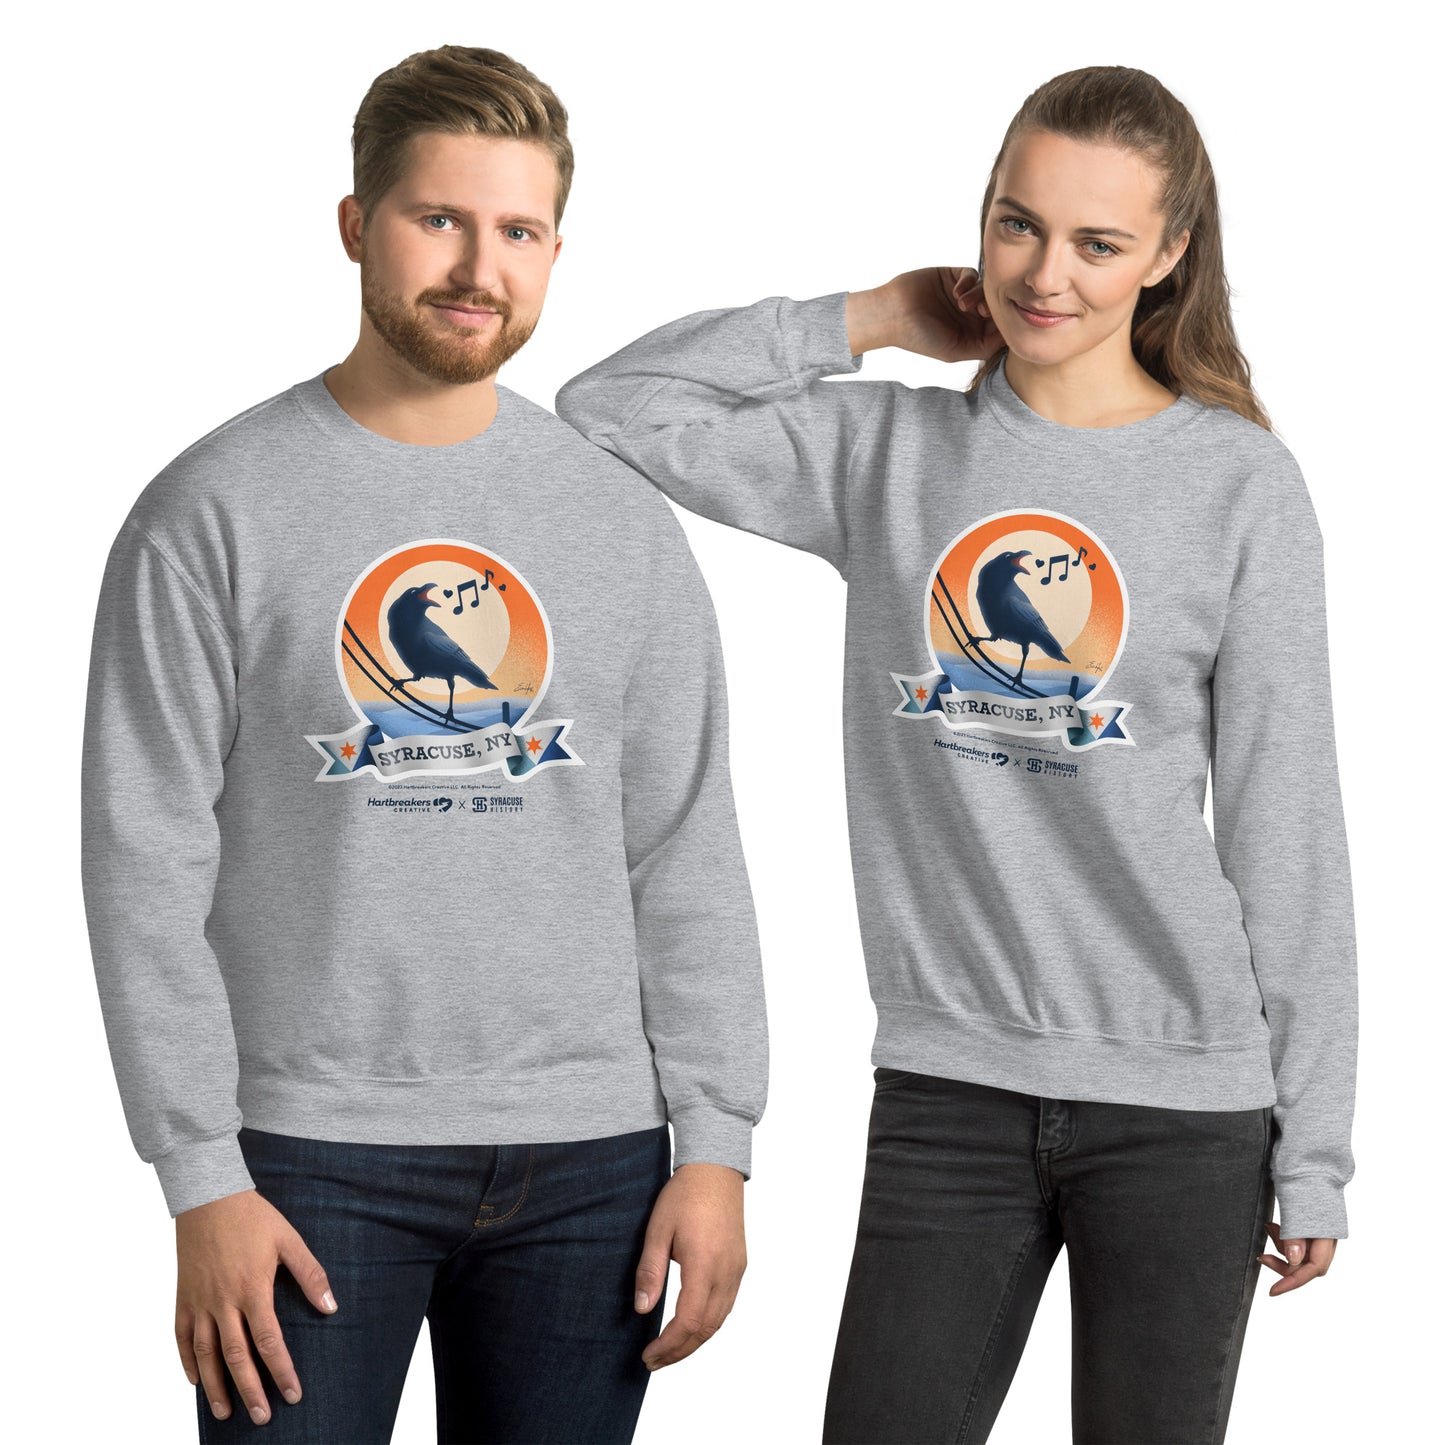 A man and woman wearing sport grey sweatshirts featuring an illustration of a crow on a telephone wire and a banner beneath it that says Syracuse, NY